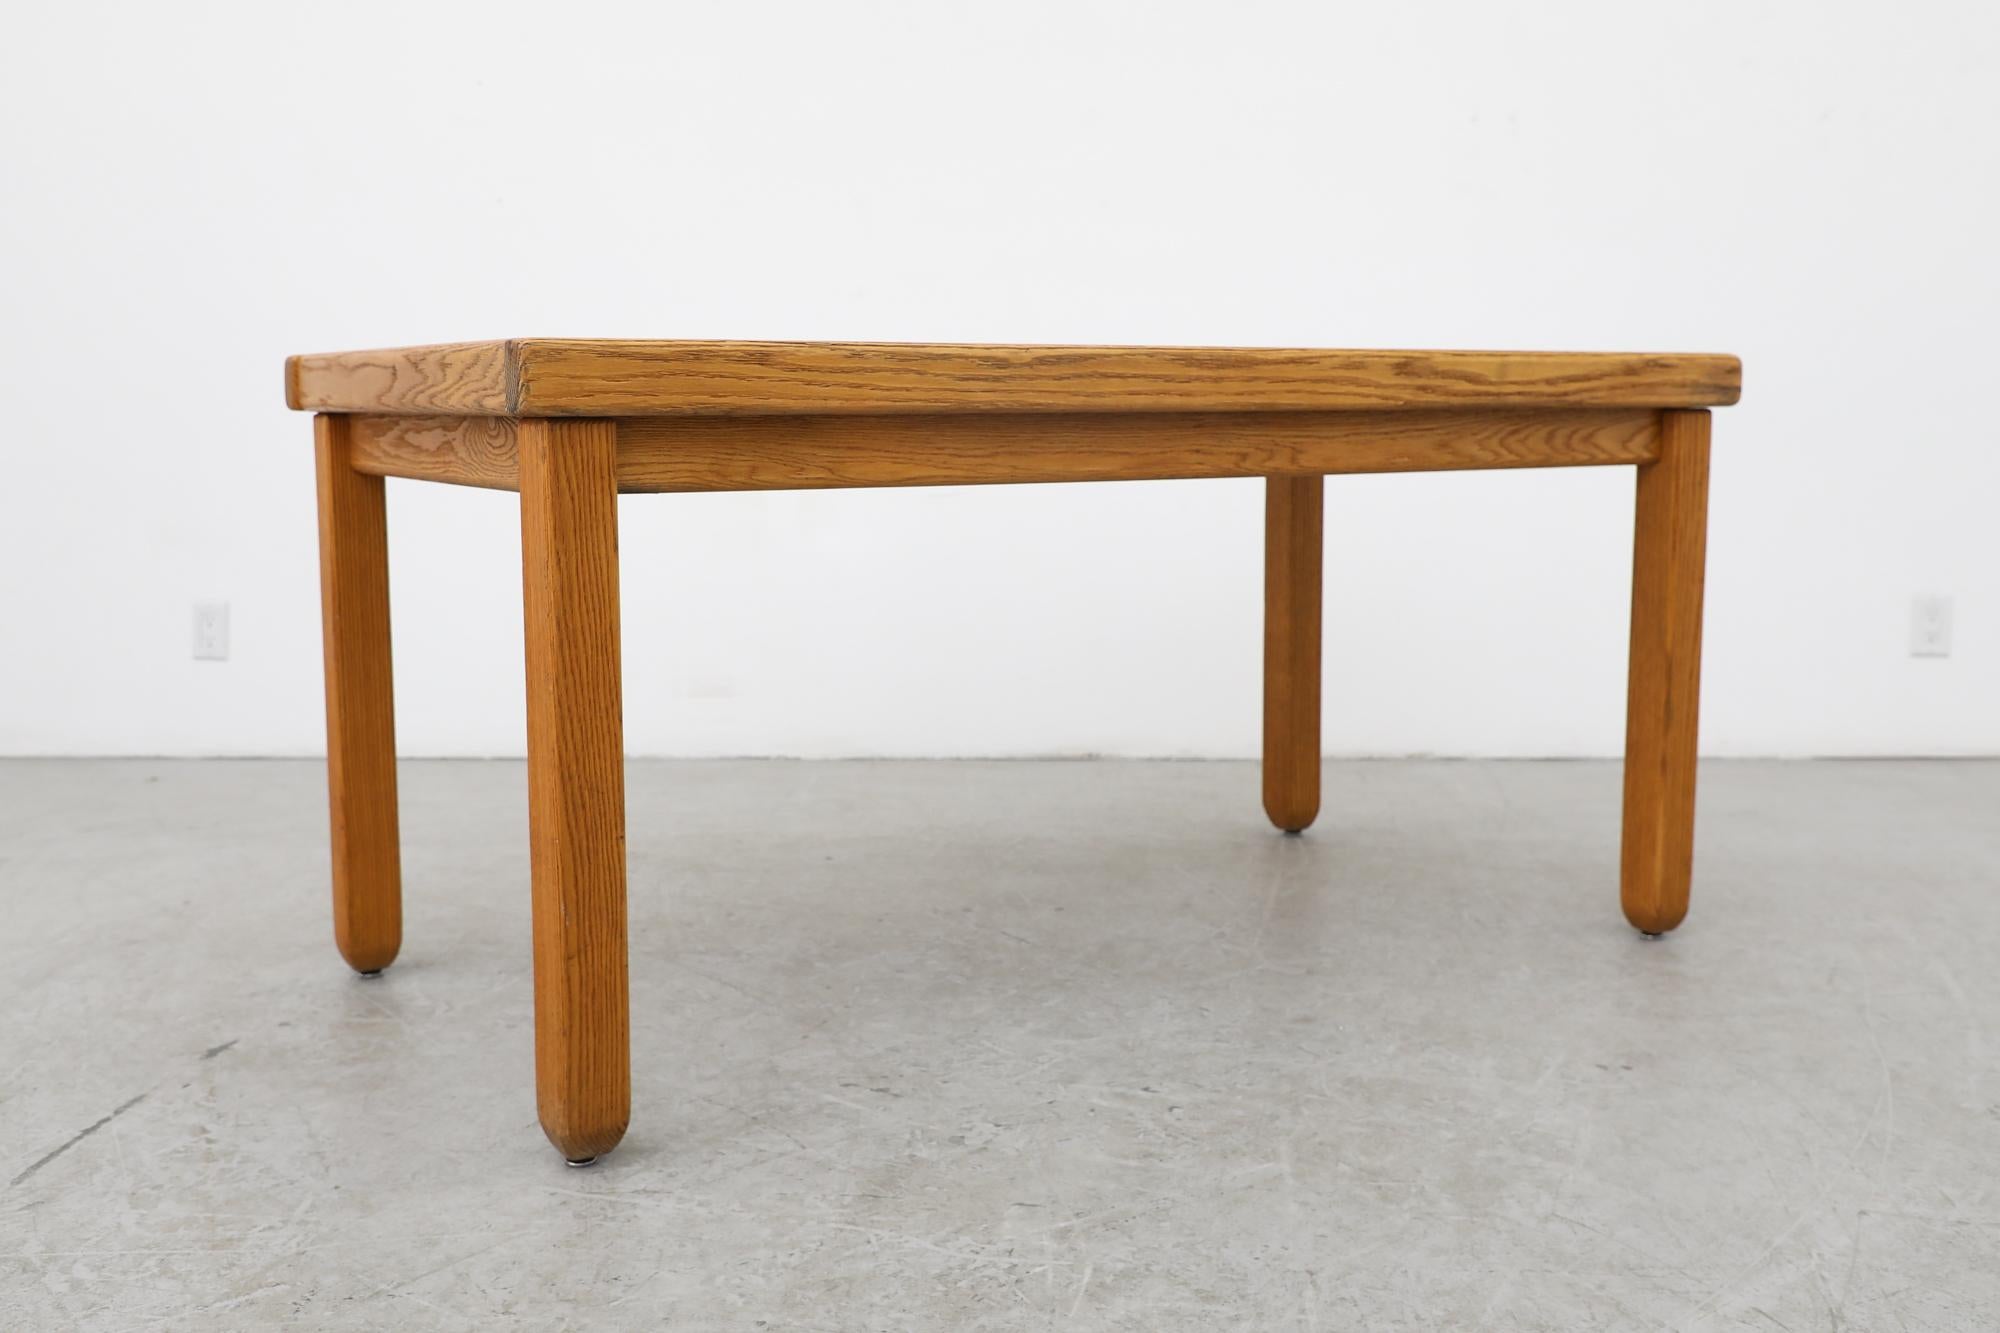 Brutalist Belgian Slatted Oak Dining Table w/ Rounded Legs Attributed to DePuydt For Sale 3